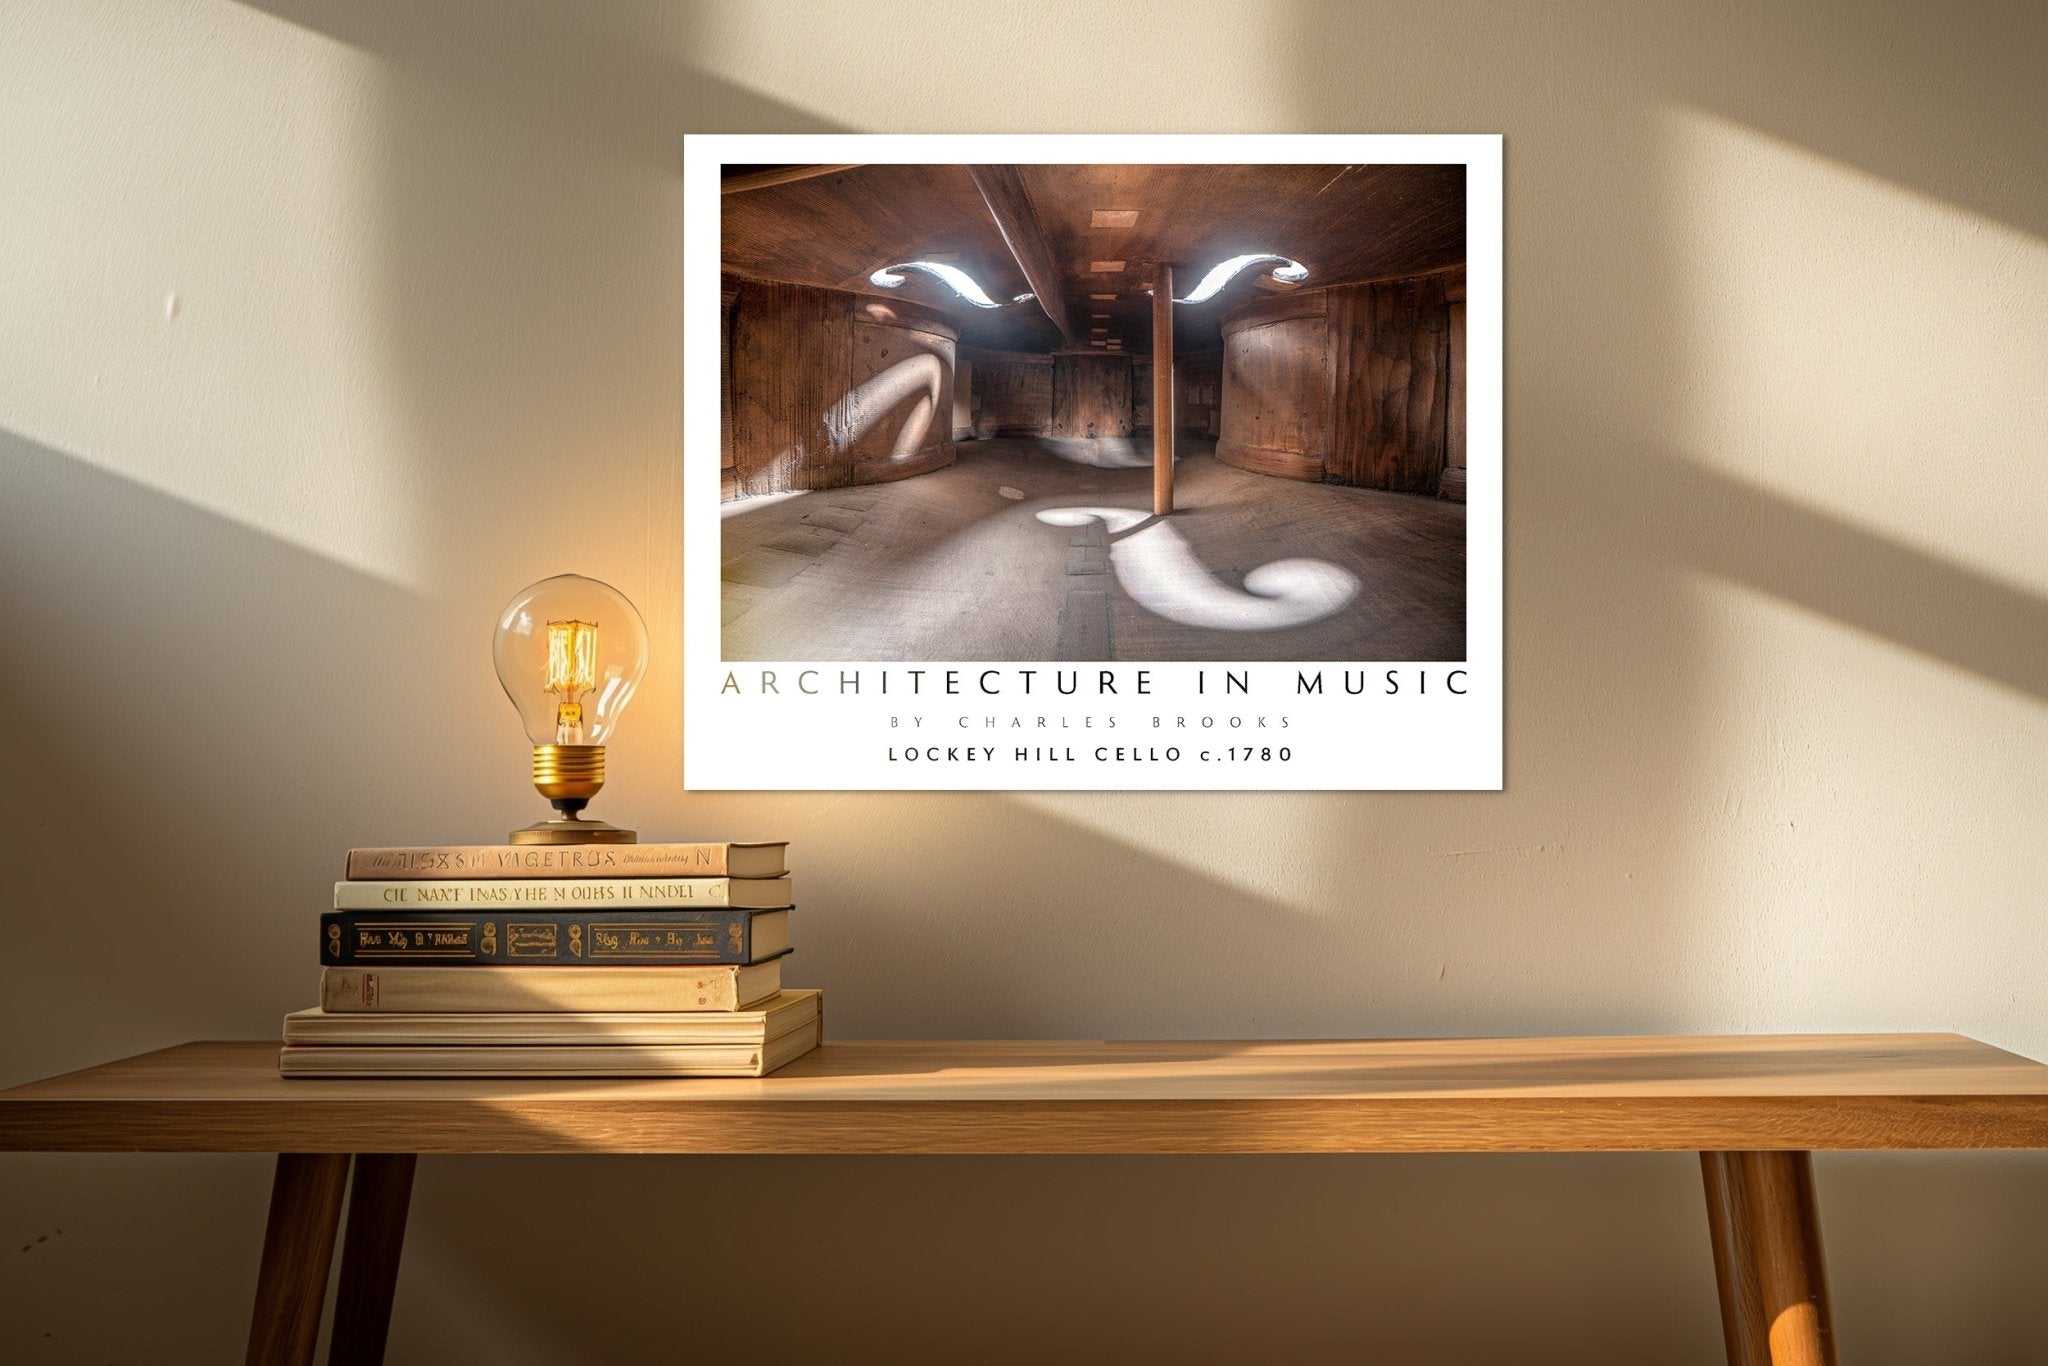 Photo of Lockey Hill Cello Circa 1780, Part 1. High Quality Poster. - Giclée Poster Print - Architecture In Music